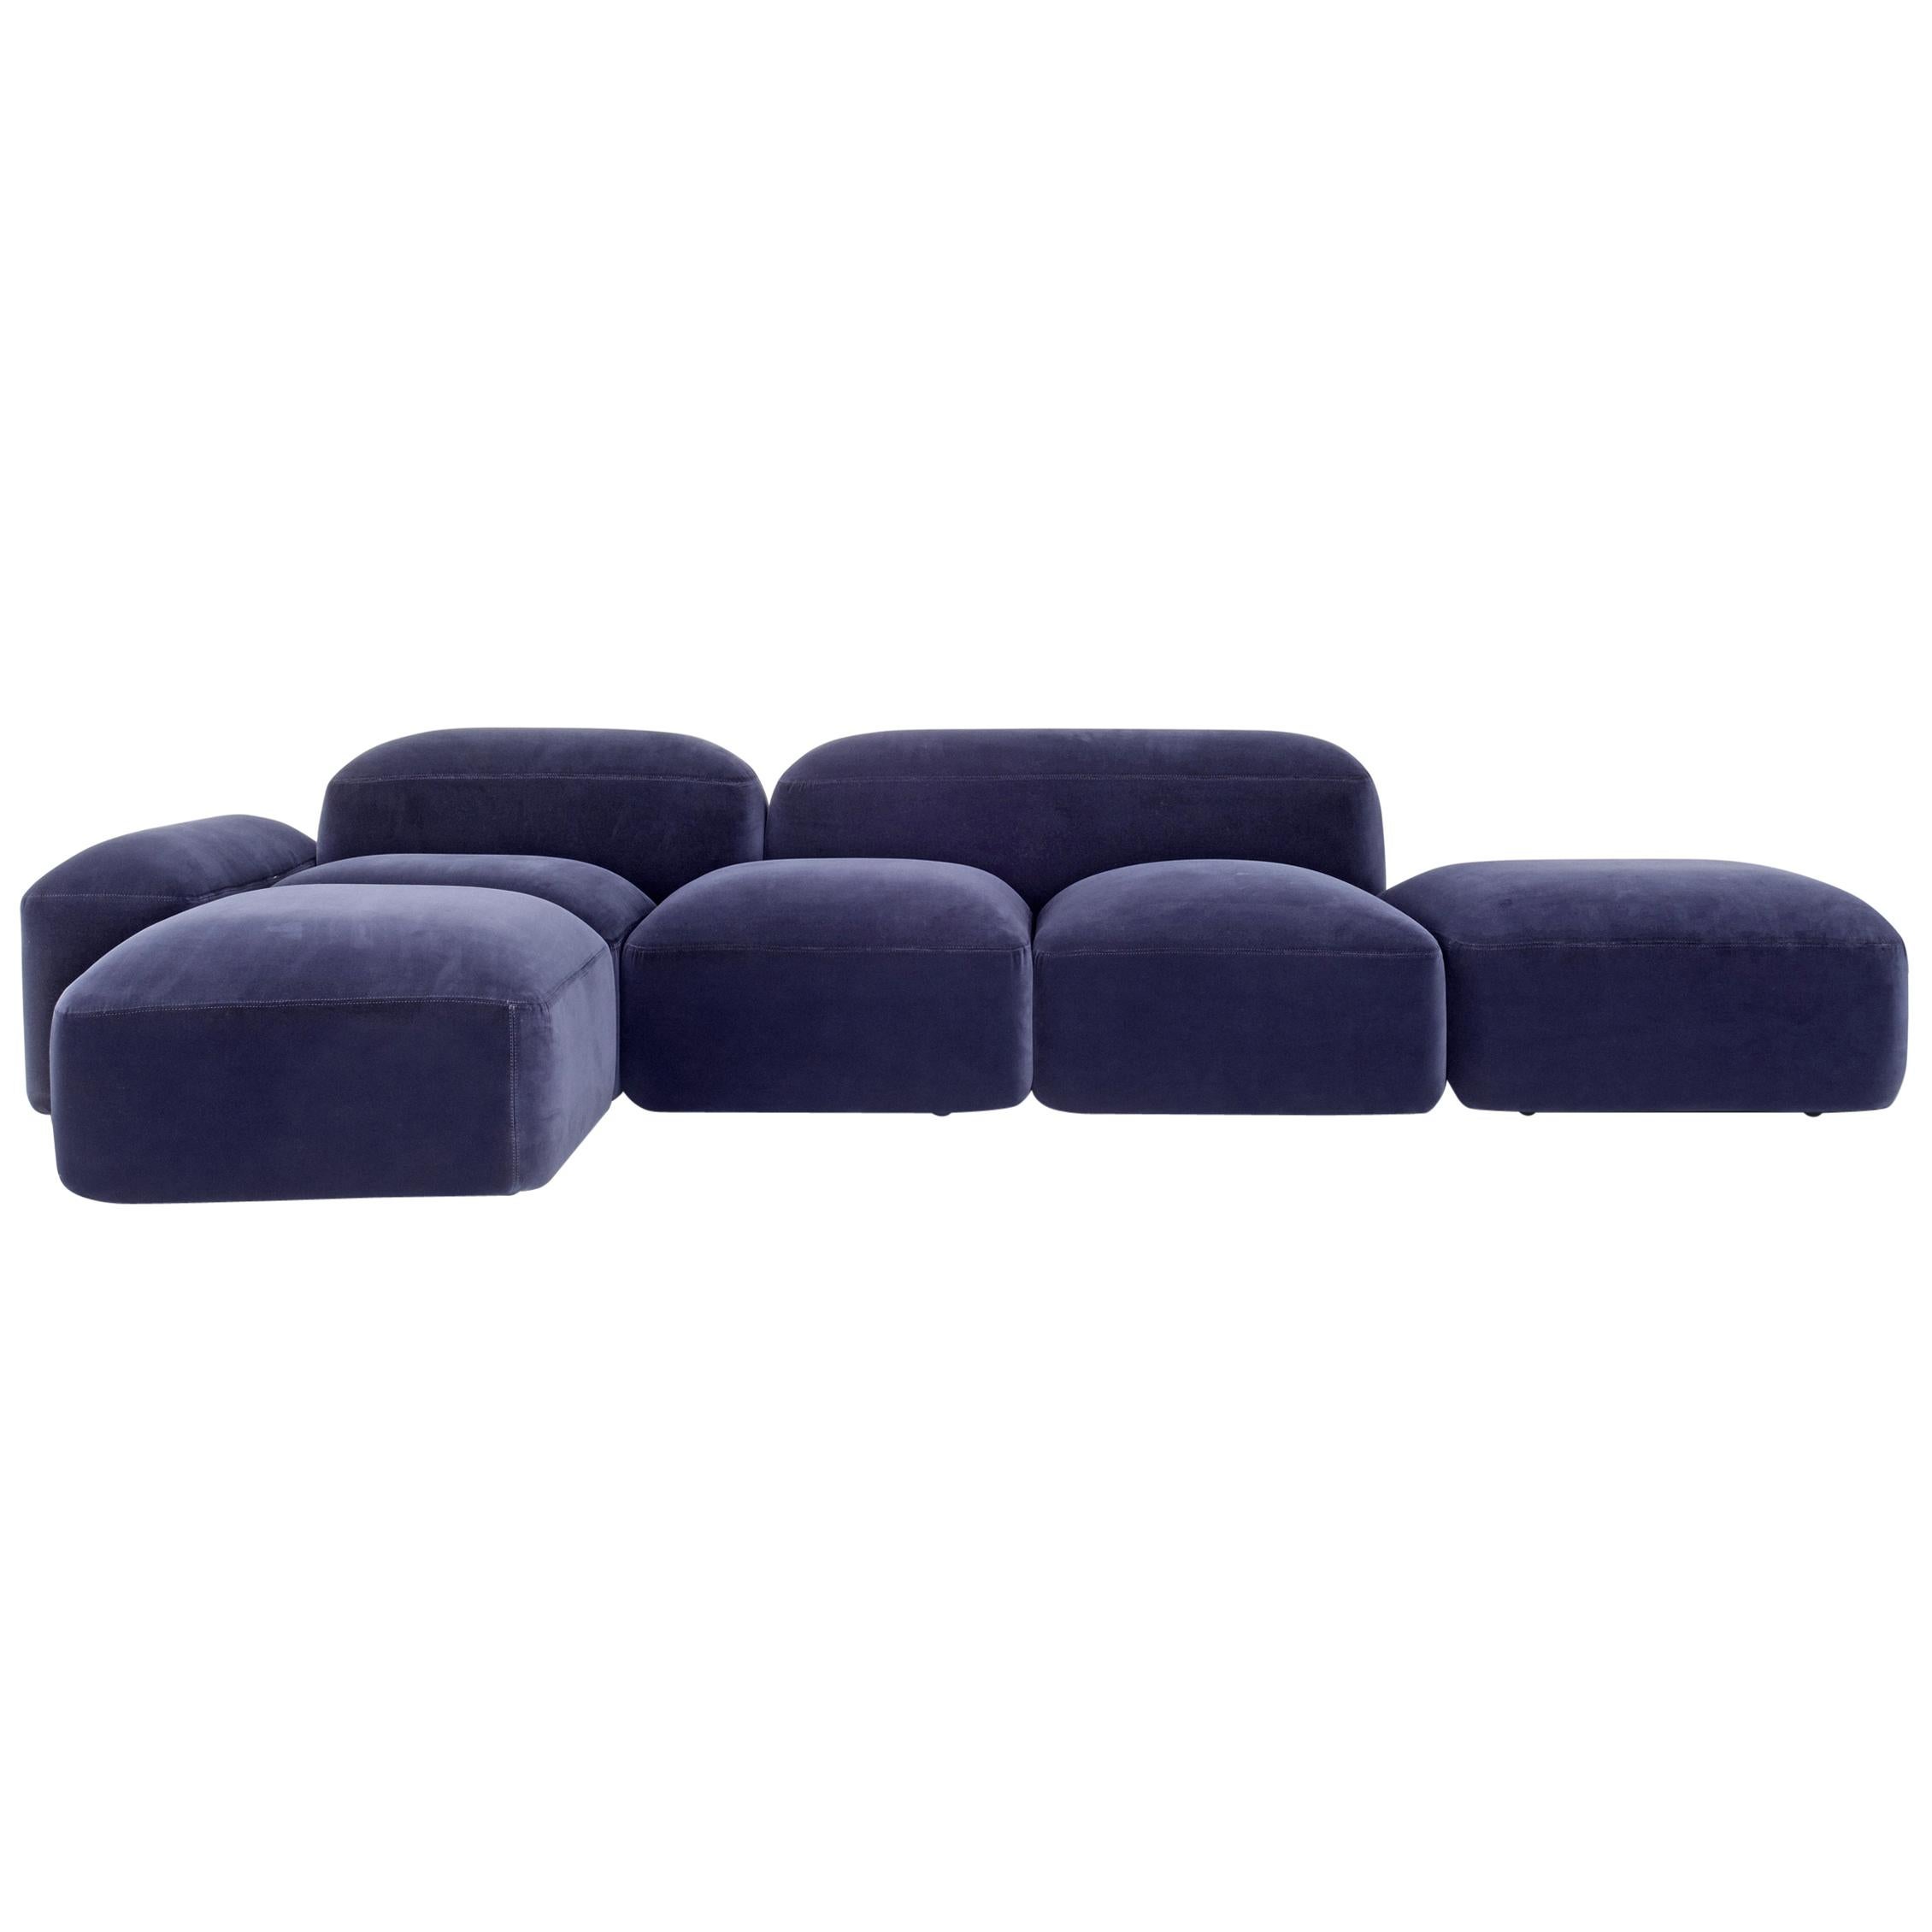 LAPIS Sofa, customized
Configuration: as per the main image
Overall dimensions: 277 x 267 cm
Fabric: COM (Perennials Ishi Bluestone) to be shipped to the manufacture in Italy (at the client's expense)

--
'Lapis' is a collection of sofas and seats